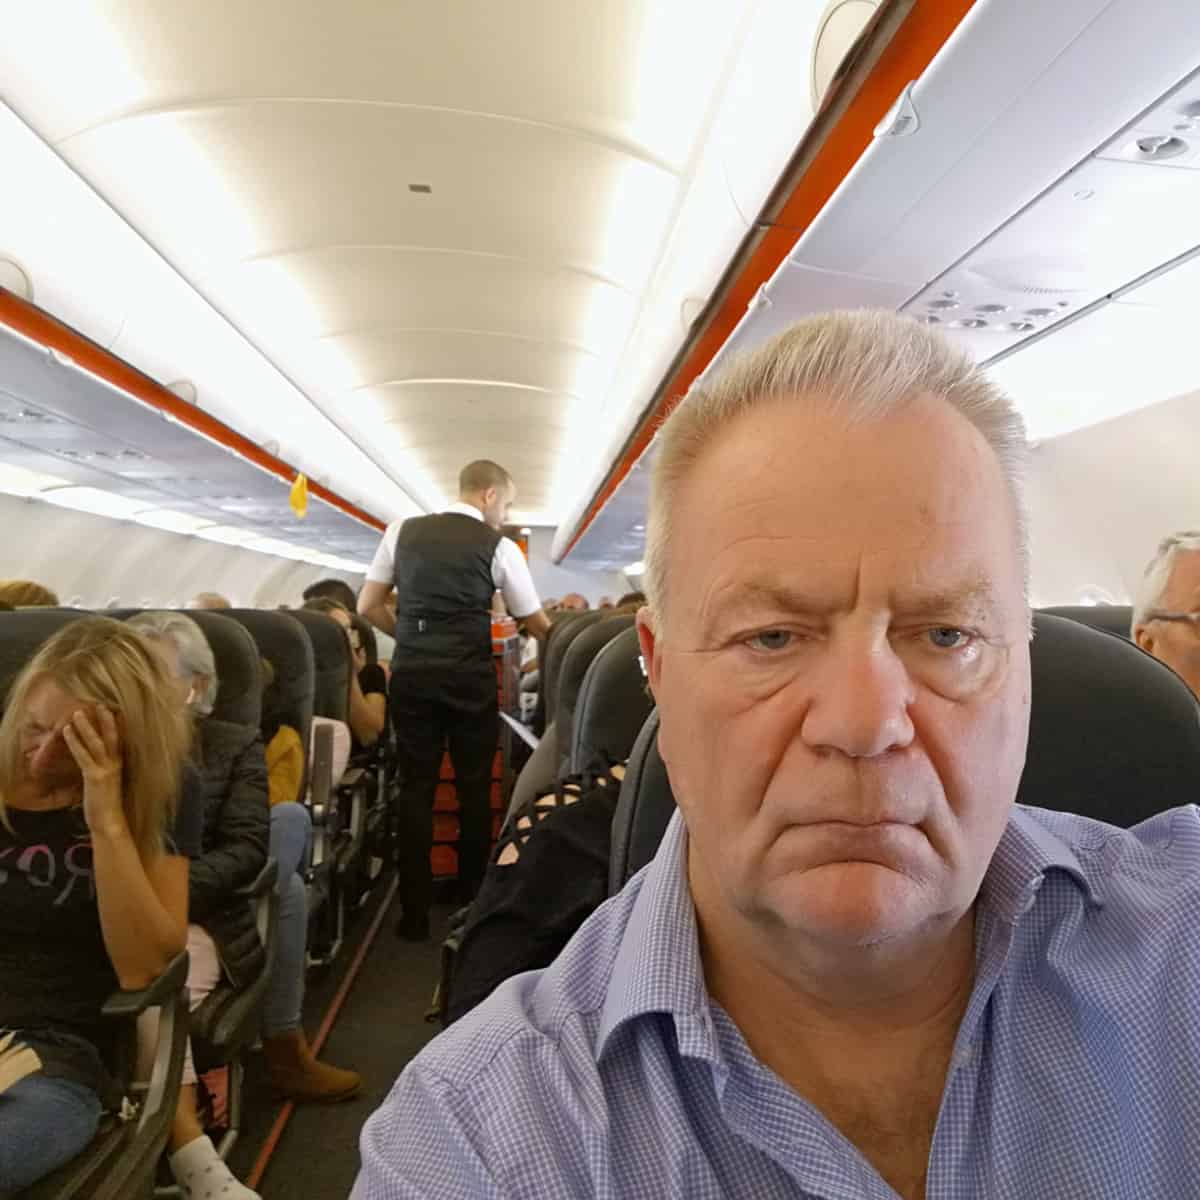 How Much Money Can You Take on a Plane? 1